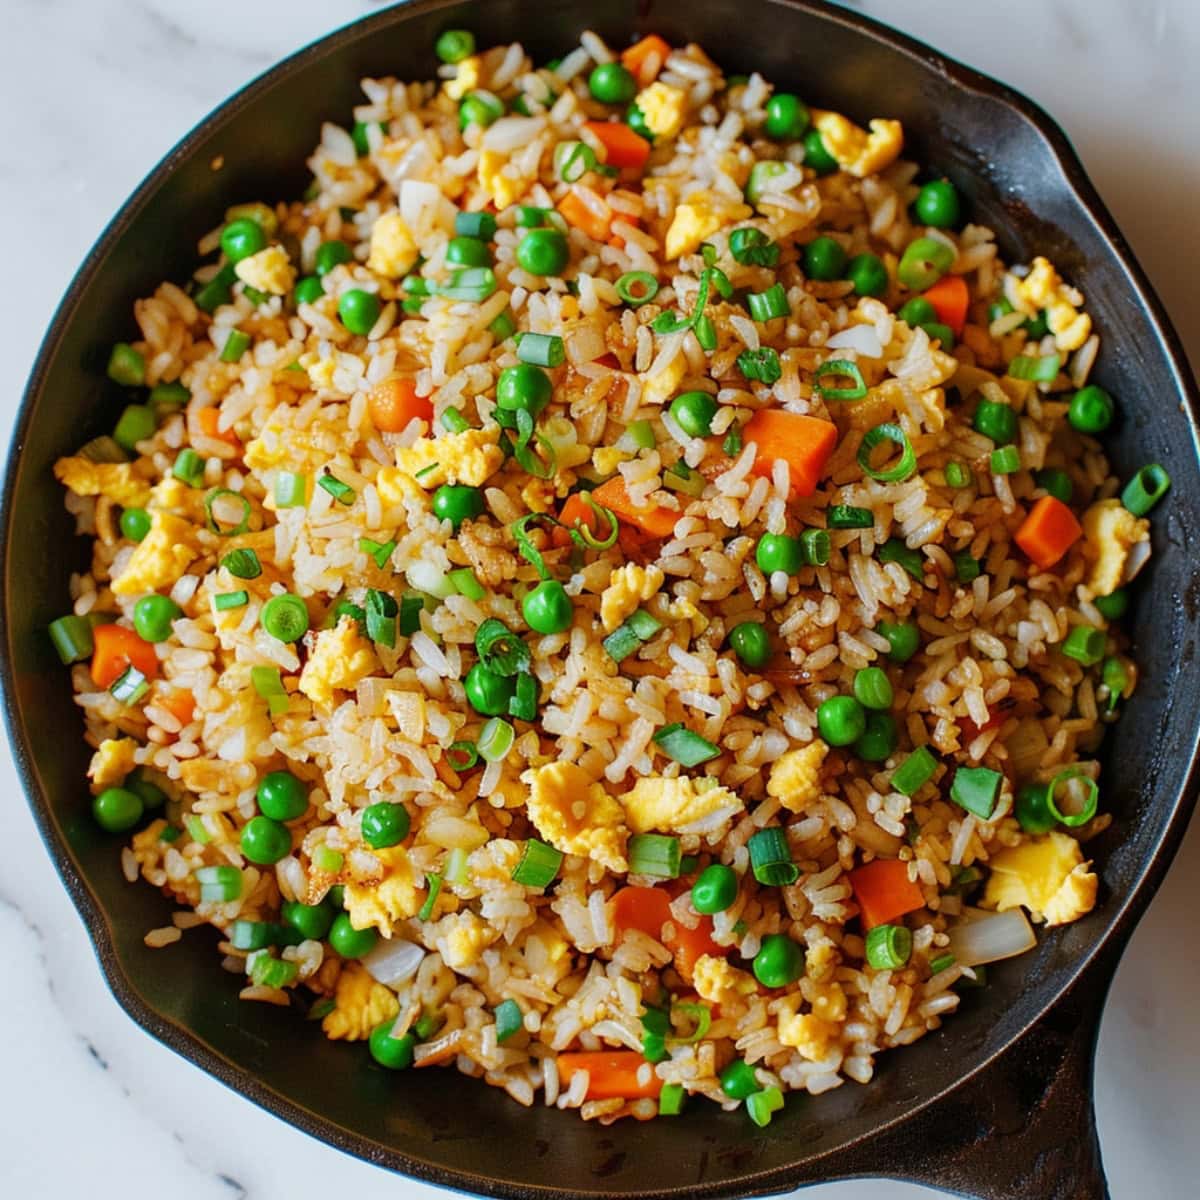 Savory hibachi fried rice in a skillet, featuring tender vegetables and scrambled eggs